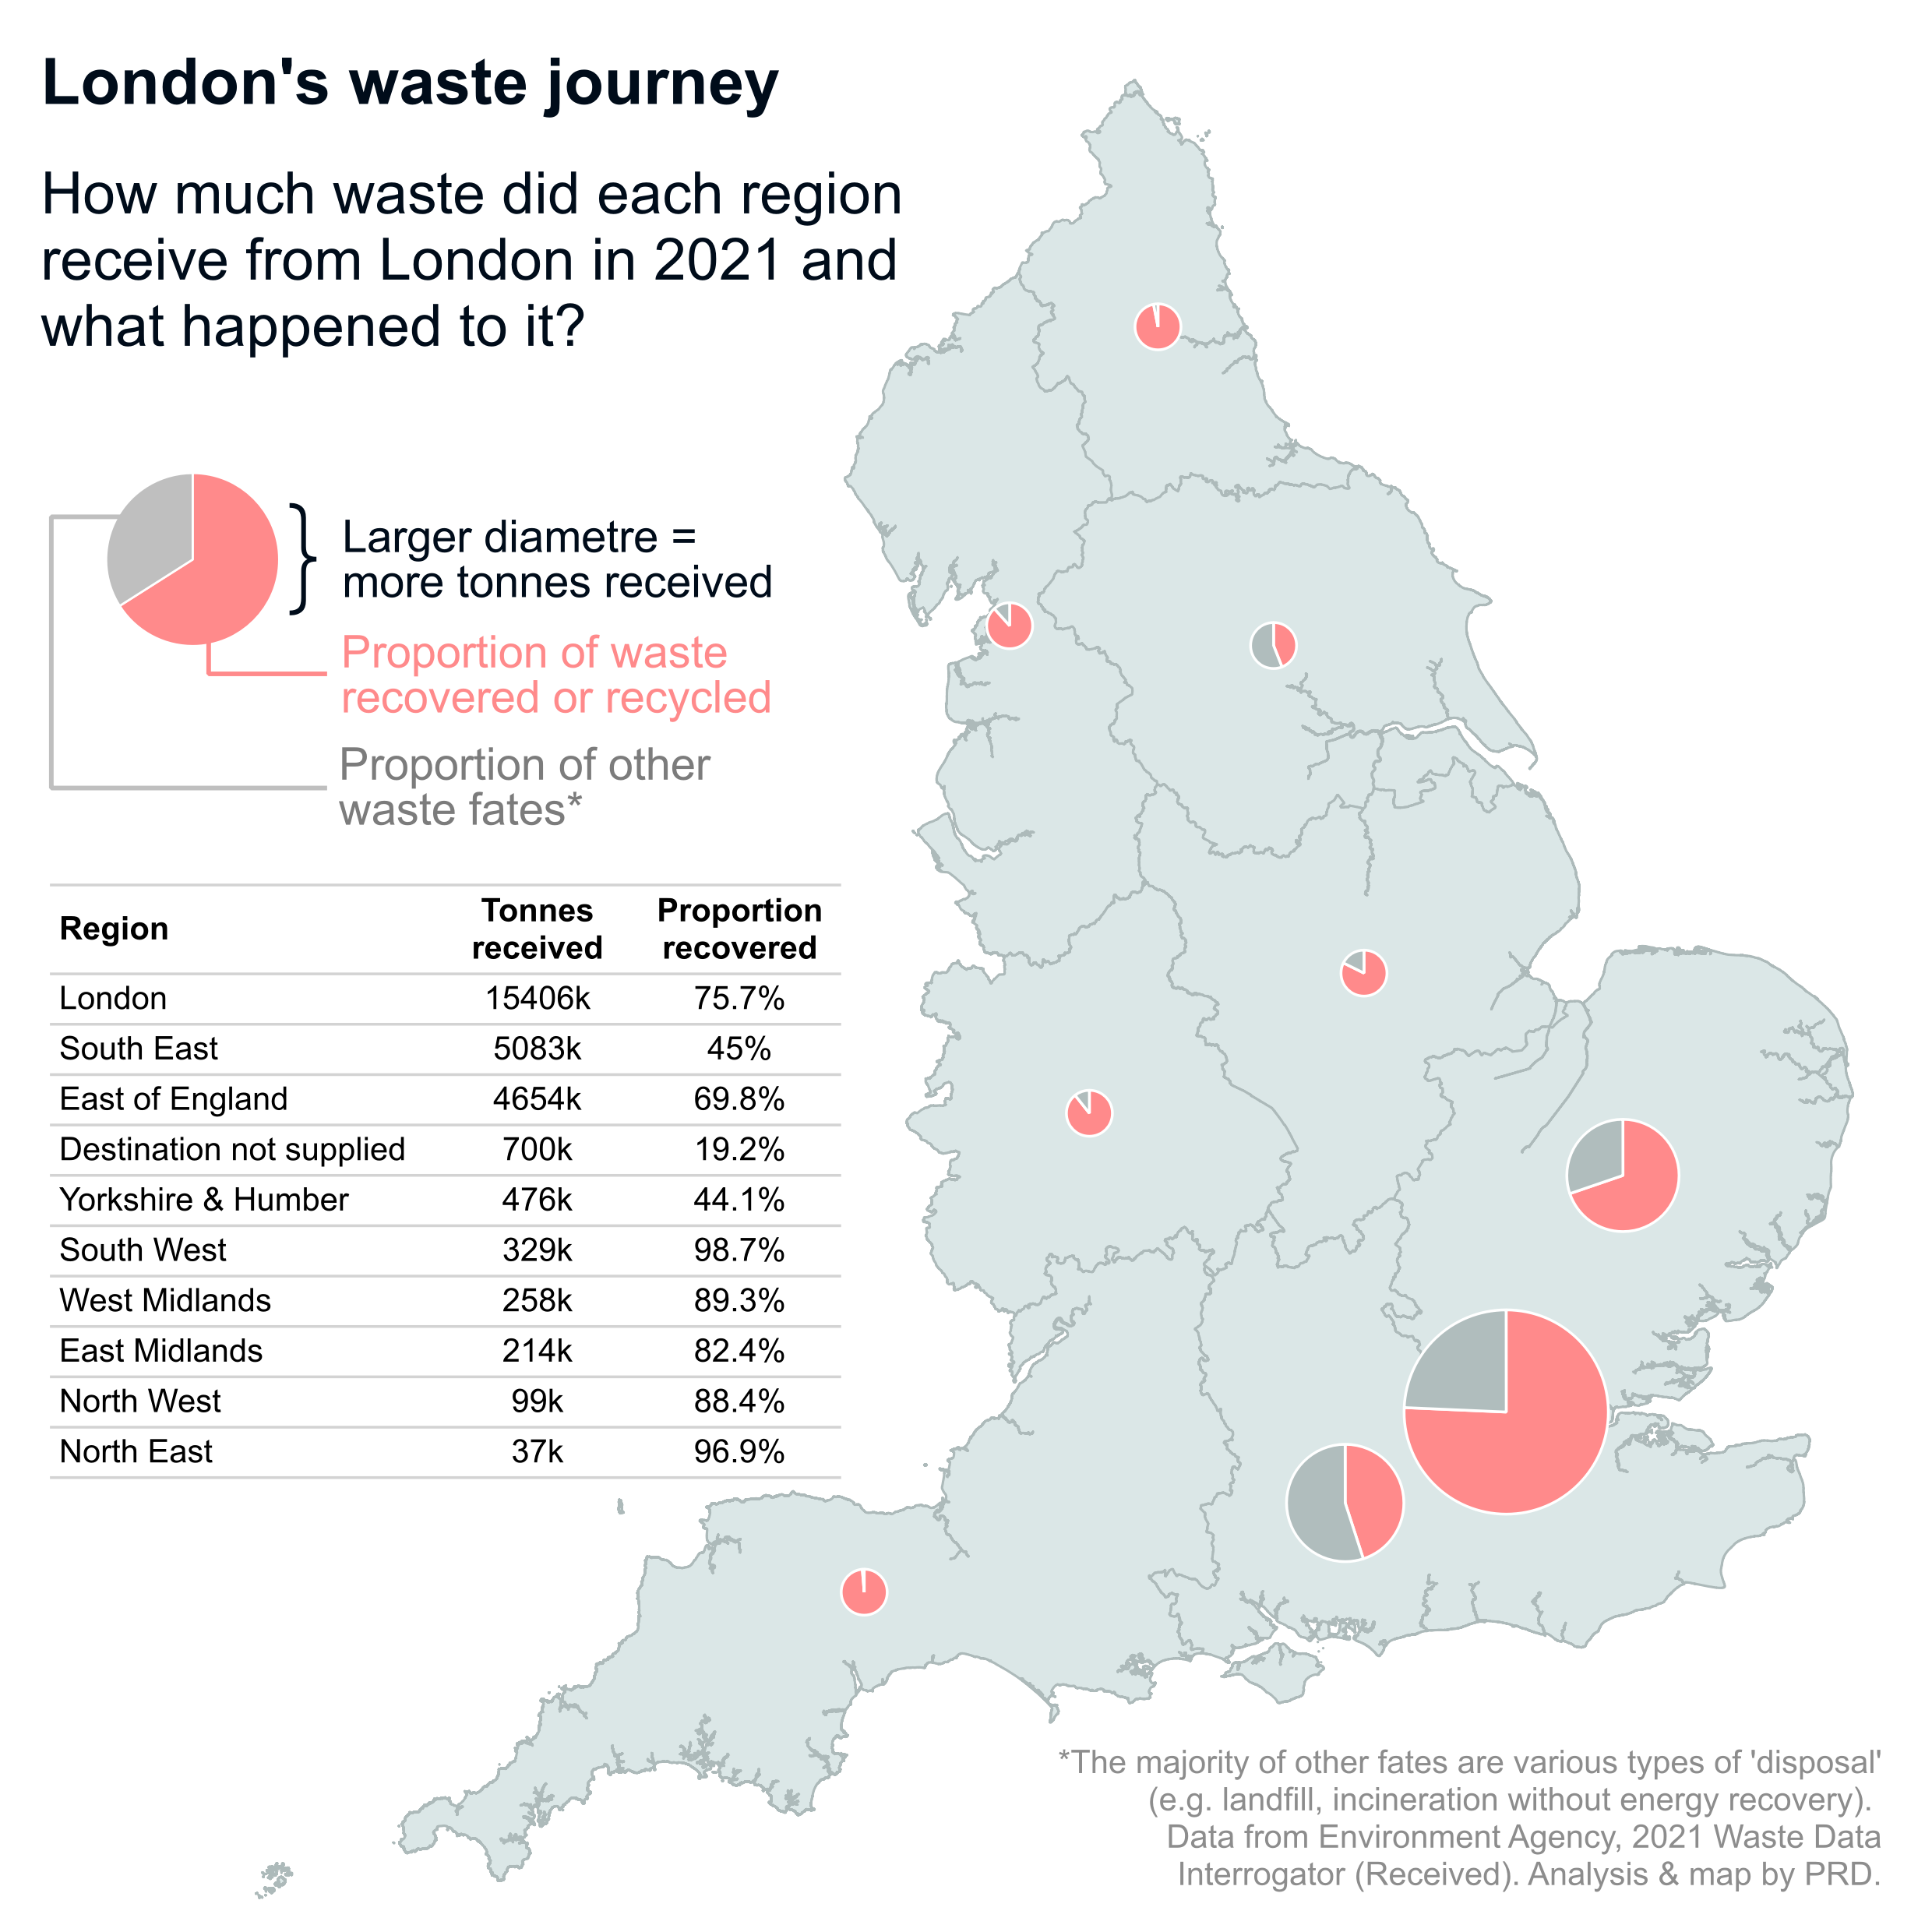 A map of English regions. Each region has a pie chart on it. The diameter of the pie corresponds to the amount of waste that region receives from London, as of 2021. One slice of the pie indicates how much of the London waste is recovered, and the other slice indicates how much is not recovered. London processes a slight majority of its waste internally and recovers 3/4. Other regions vary in waste amounts received and recovery rates.